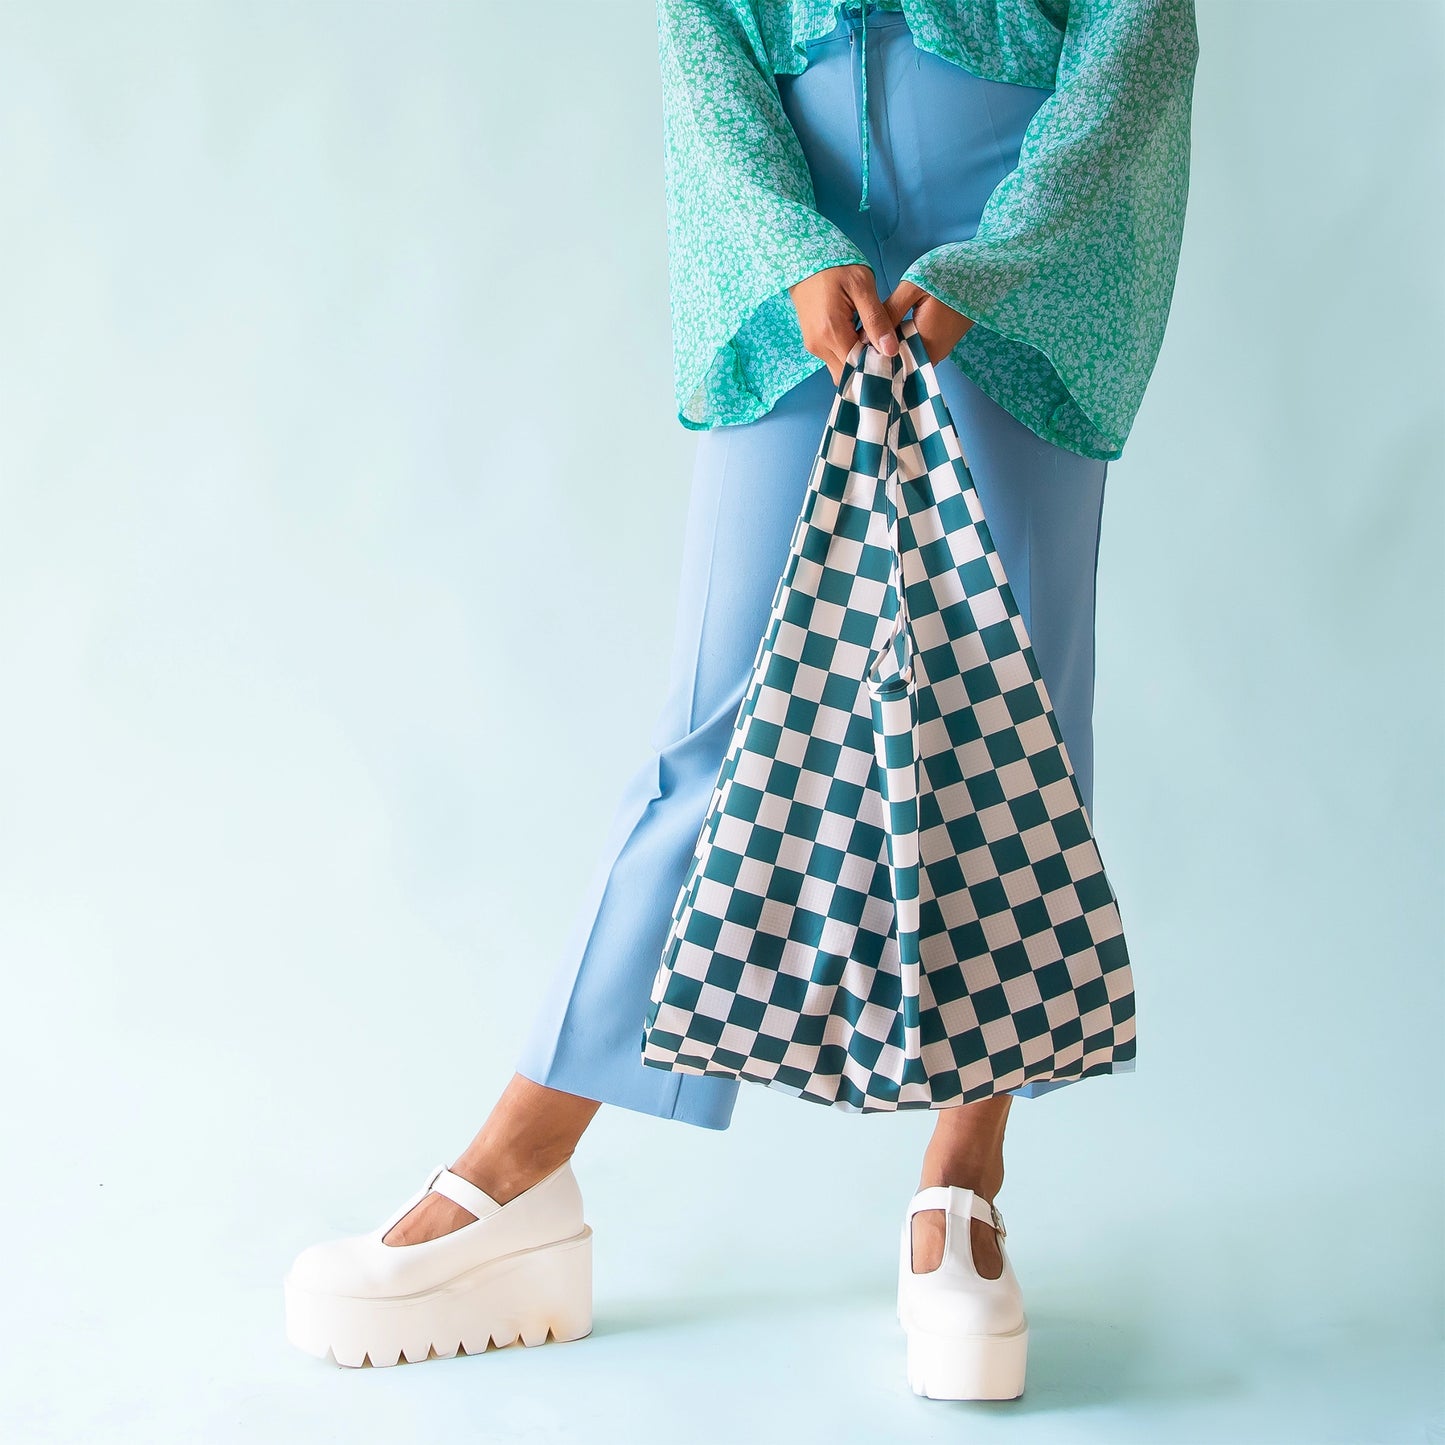 On a light blue background is a dark teal checkered nylon tote bag.